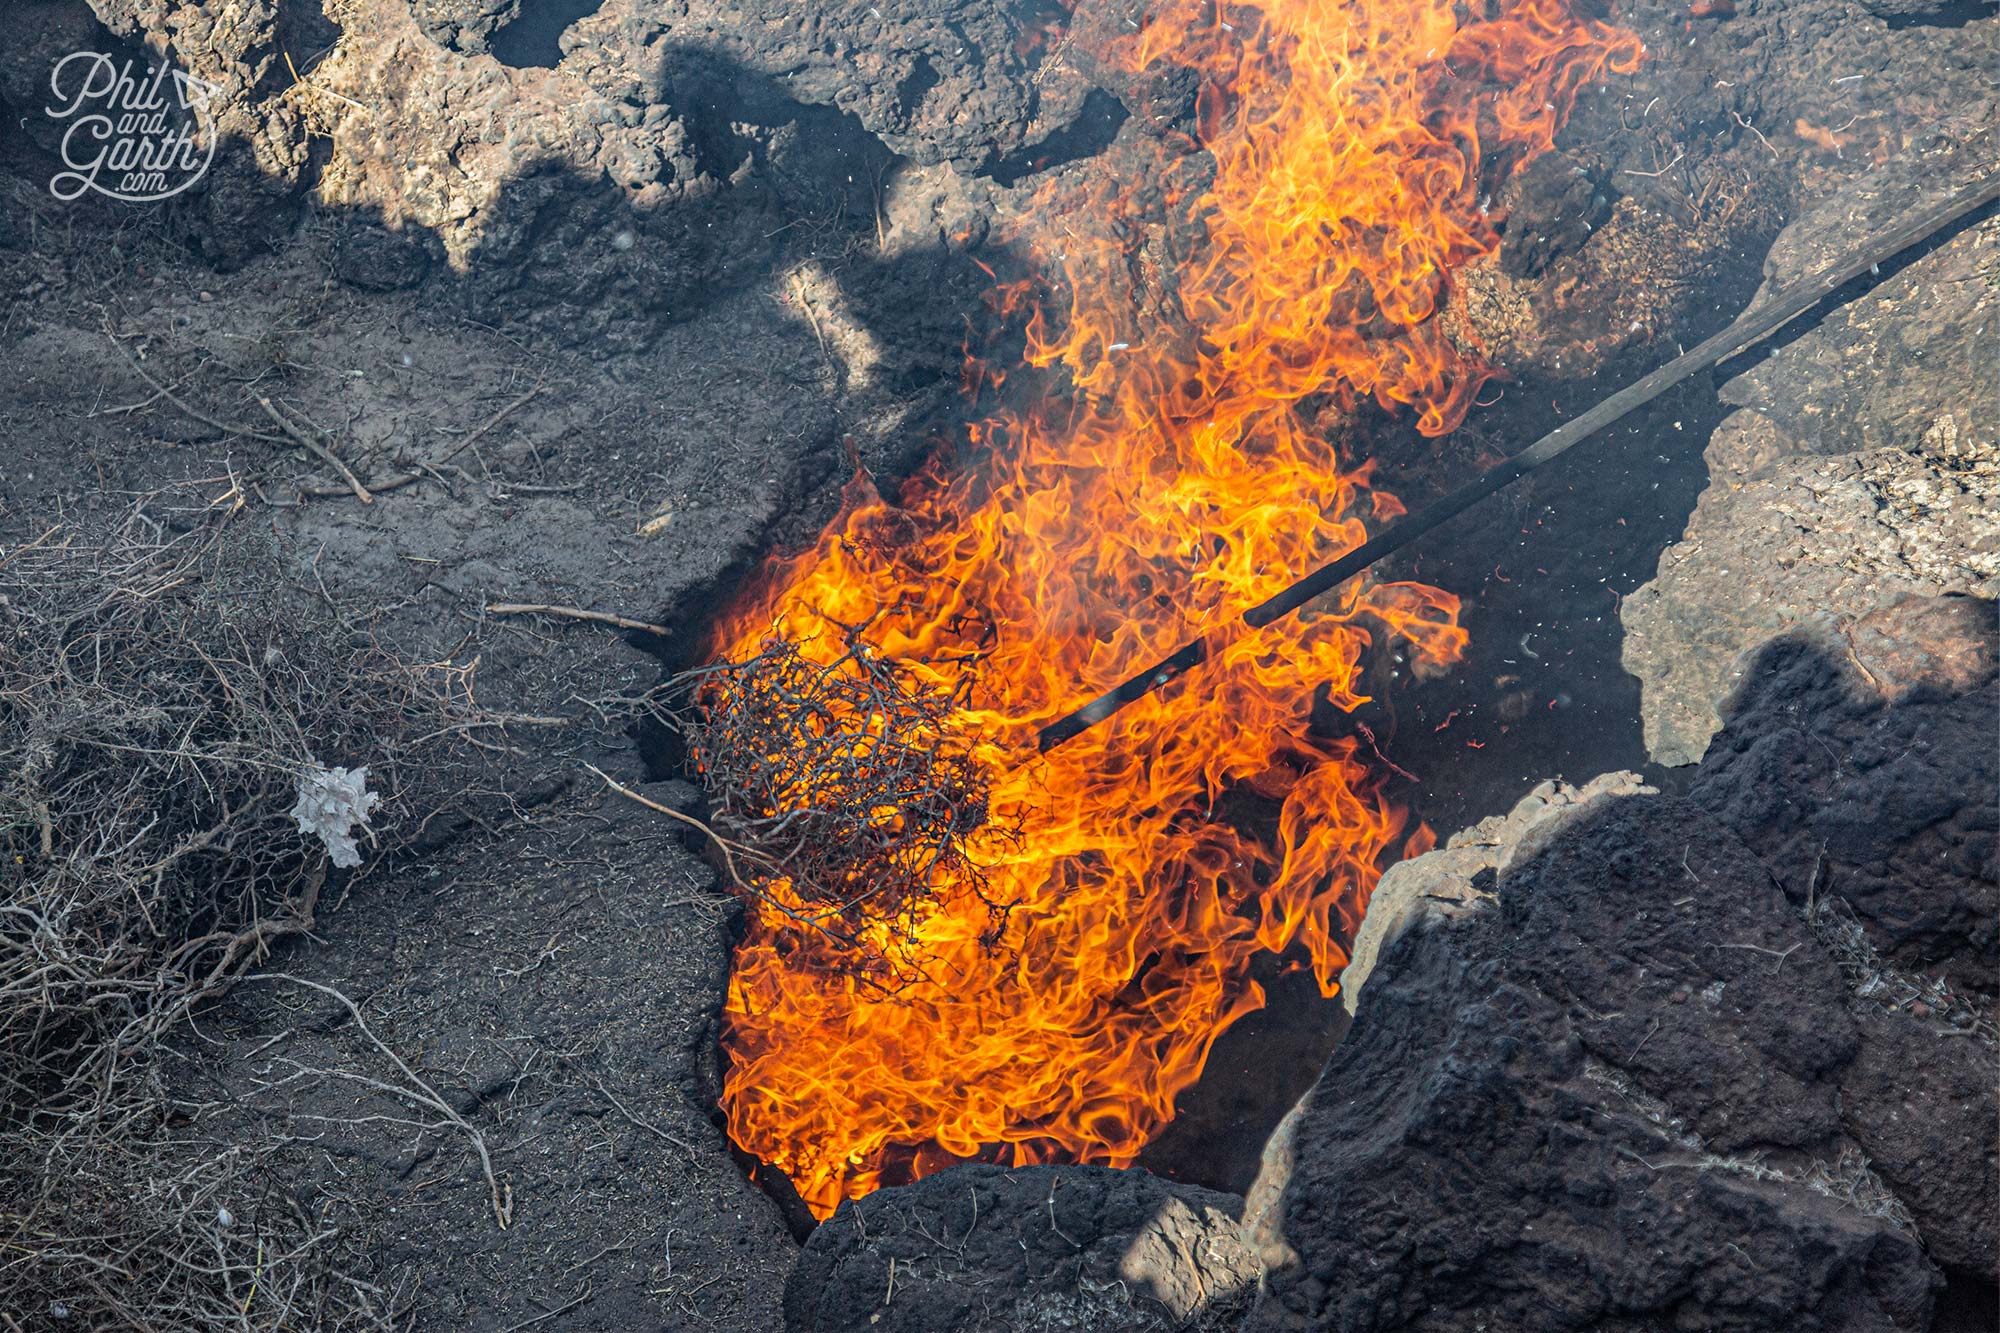 Dry grass is dropped into a shallow pit and quickly bursts into flames